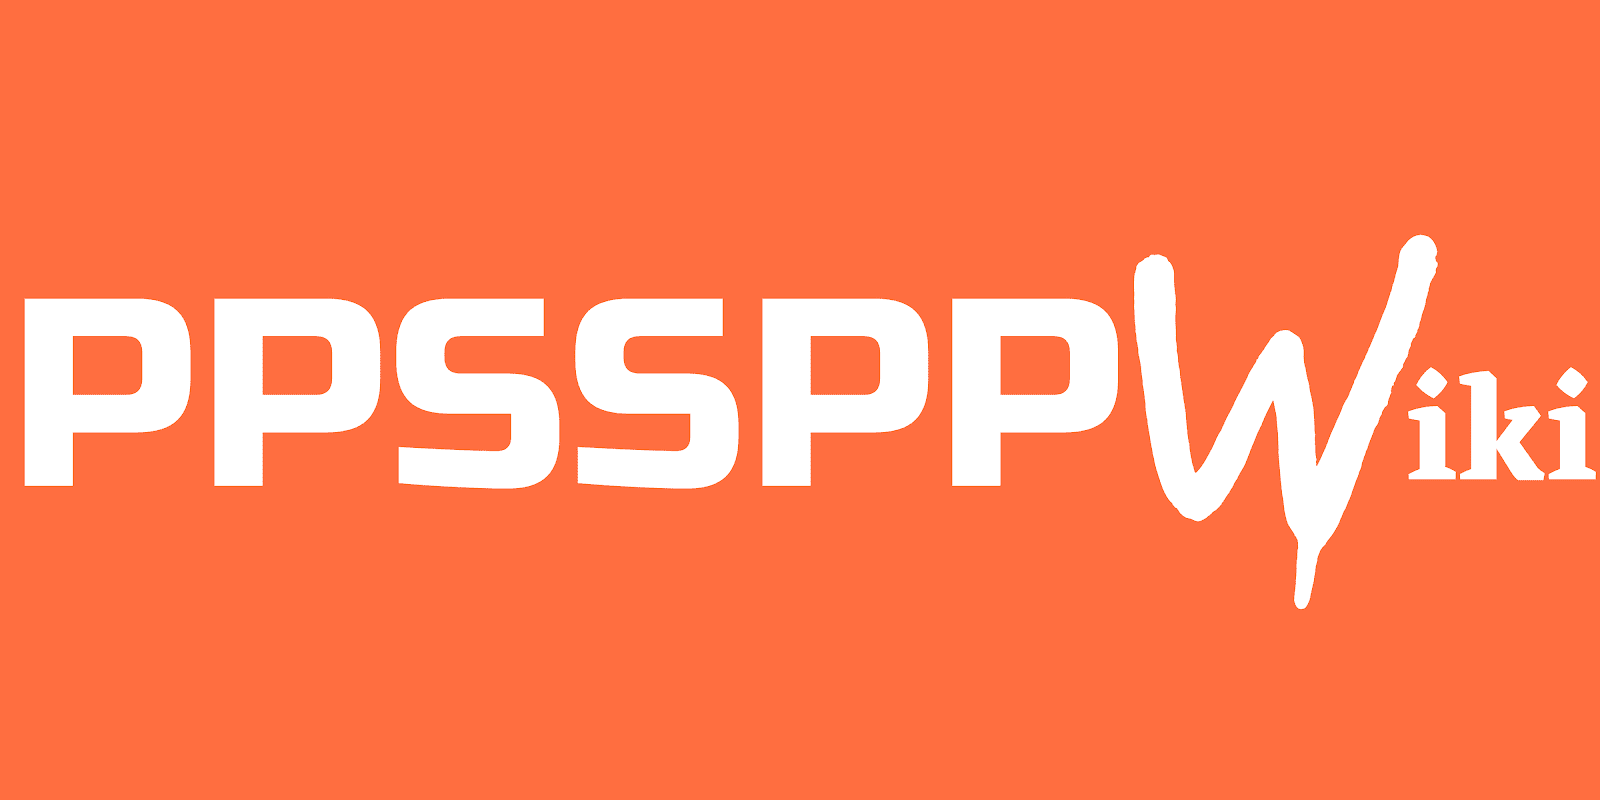 PPSSPPWiki - Download latest PPSSPP ISO ROMs and MOD FREE.